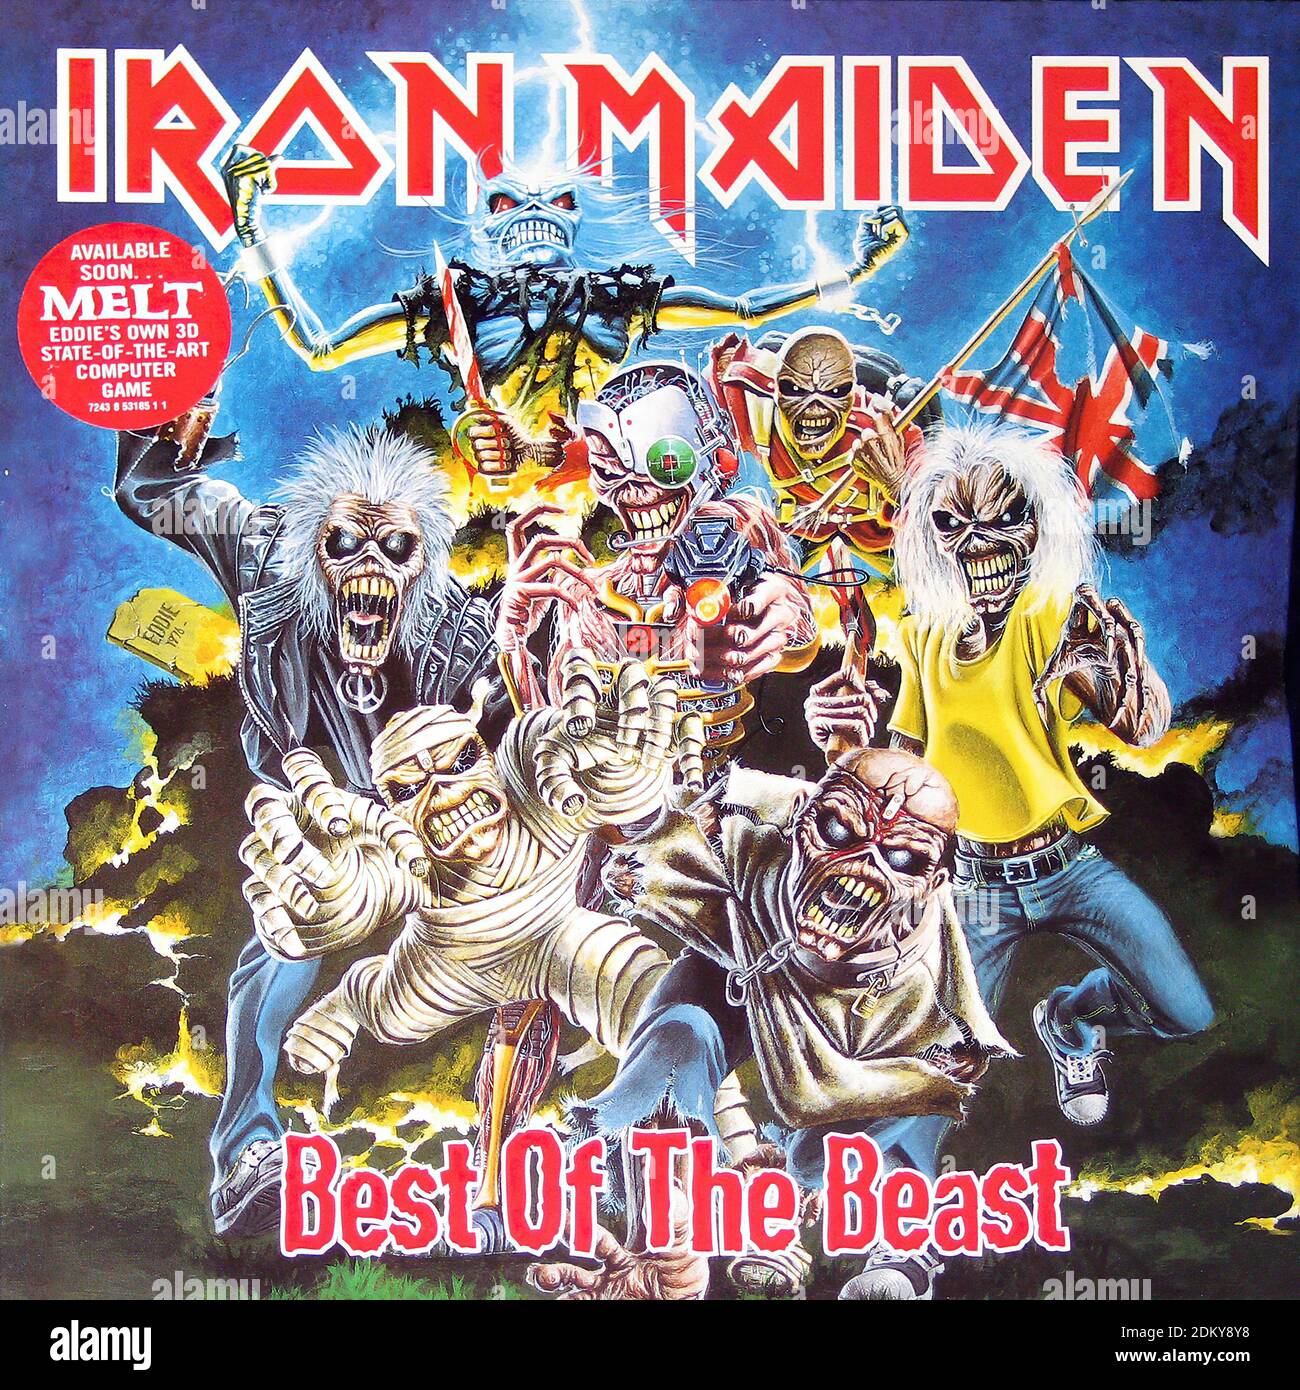 Iron Maiden best of the beast 06 - Vintage Vinyl Record Cover Stock Photo -  Alamy